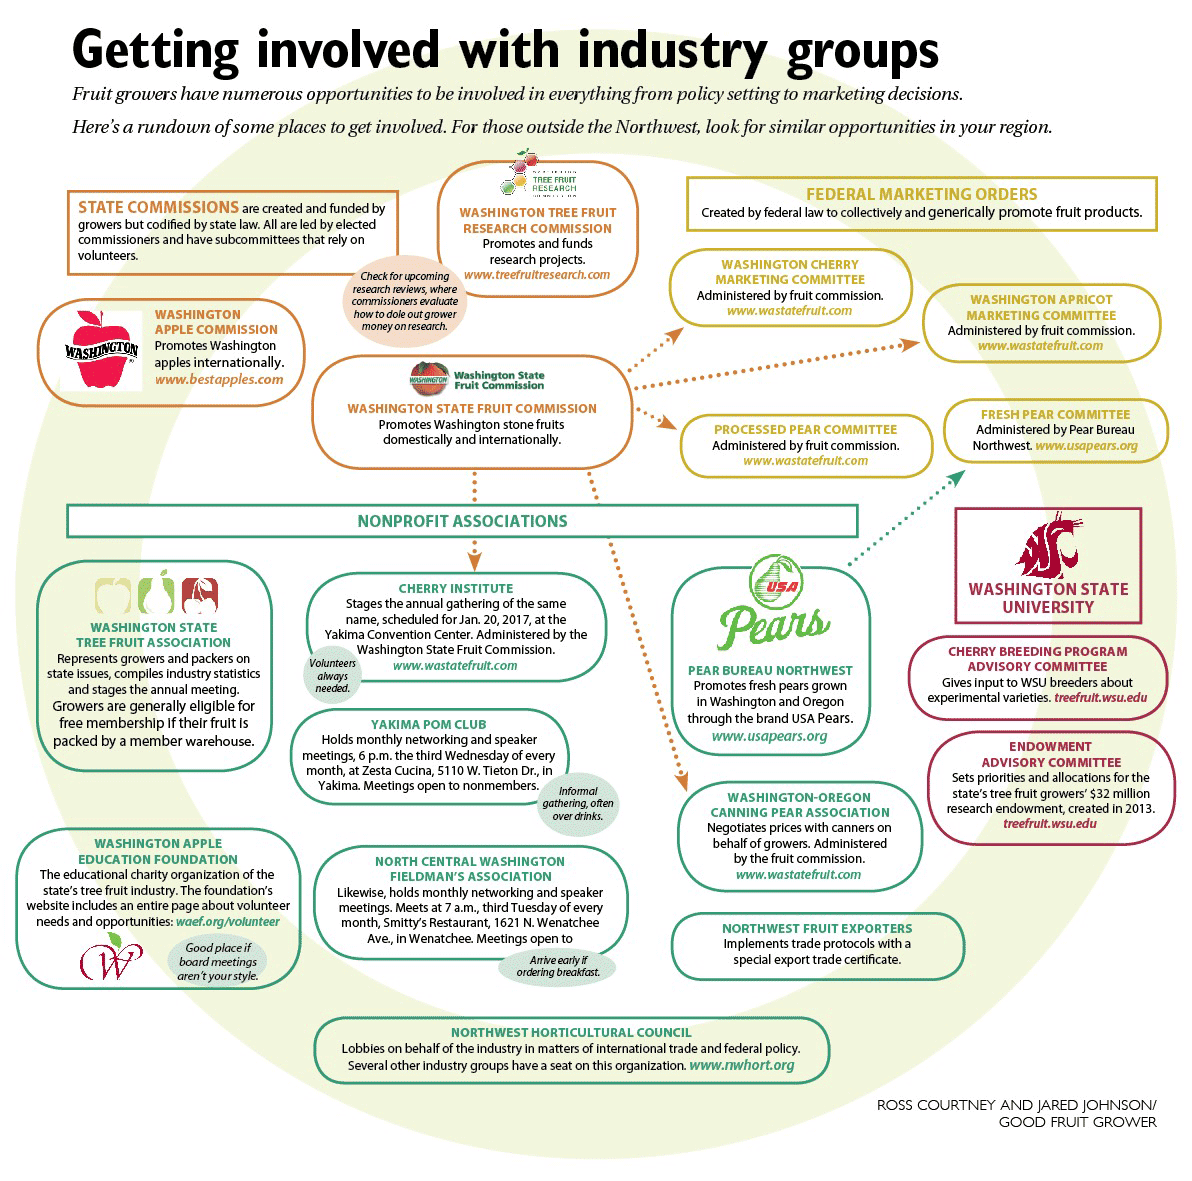 Getting involved with industry groups. Fruit growers have numerous opportunities to be involved in everything from policy setting to marketing decisions. Here’s a rundown of some places to get involved. For those outside the Northwest, look for similar opportunities in your region.